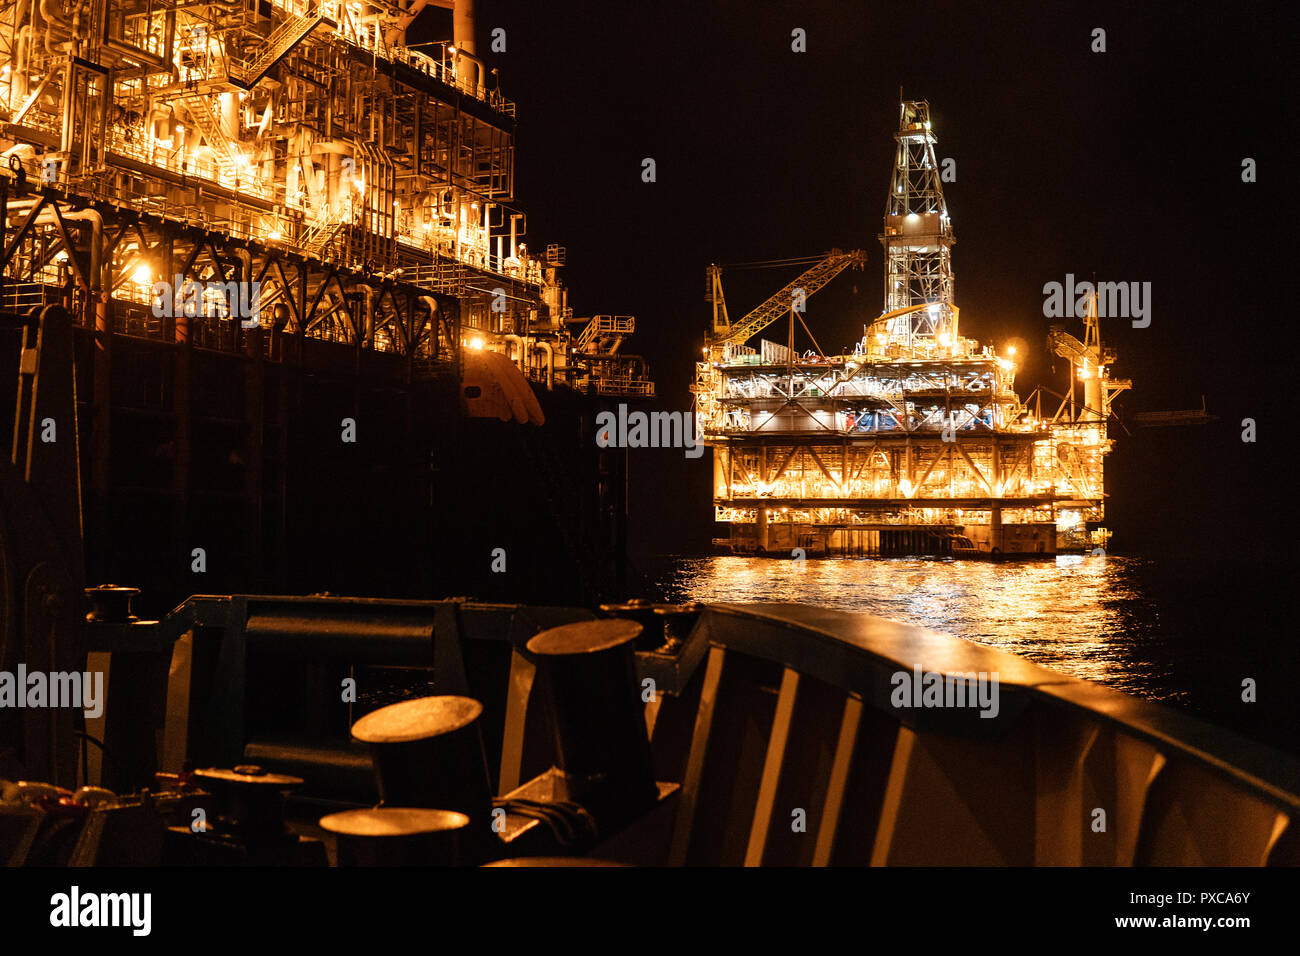 FPSO tanker vessel near Oil platform Rig at night. Offshore oil and gas industry Stock Photo